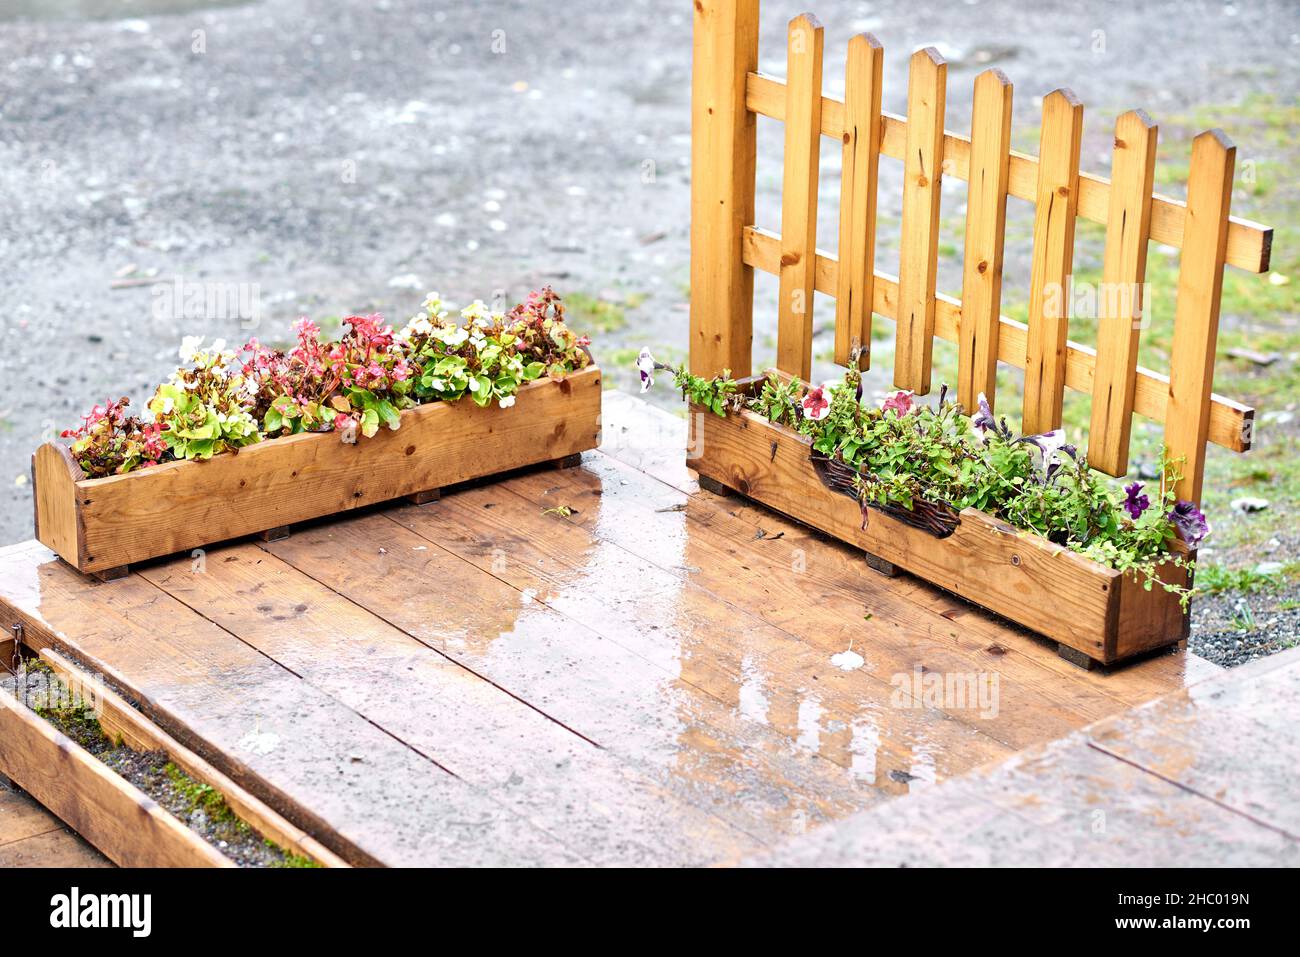 Two flower boxes perpendicular to each other on a rain-drenched boardwalk, next to a wooden fence. Stock Photo